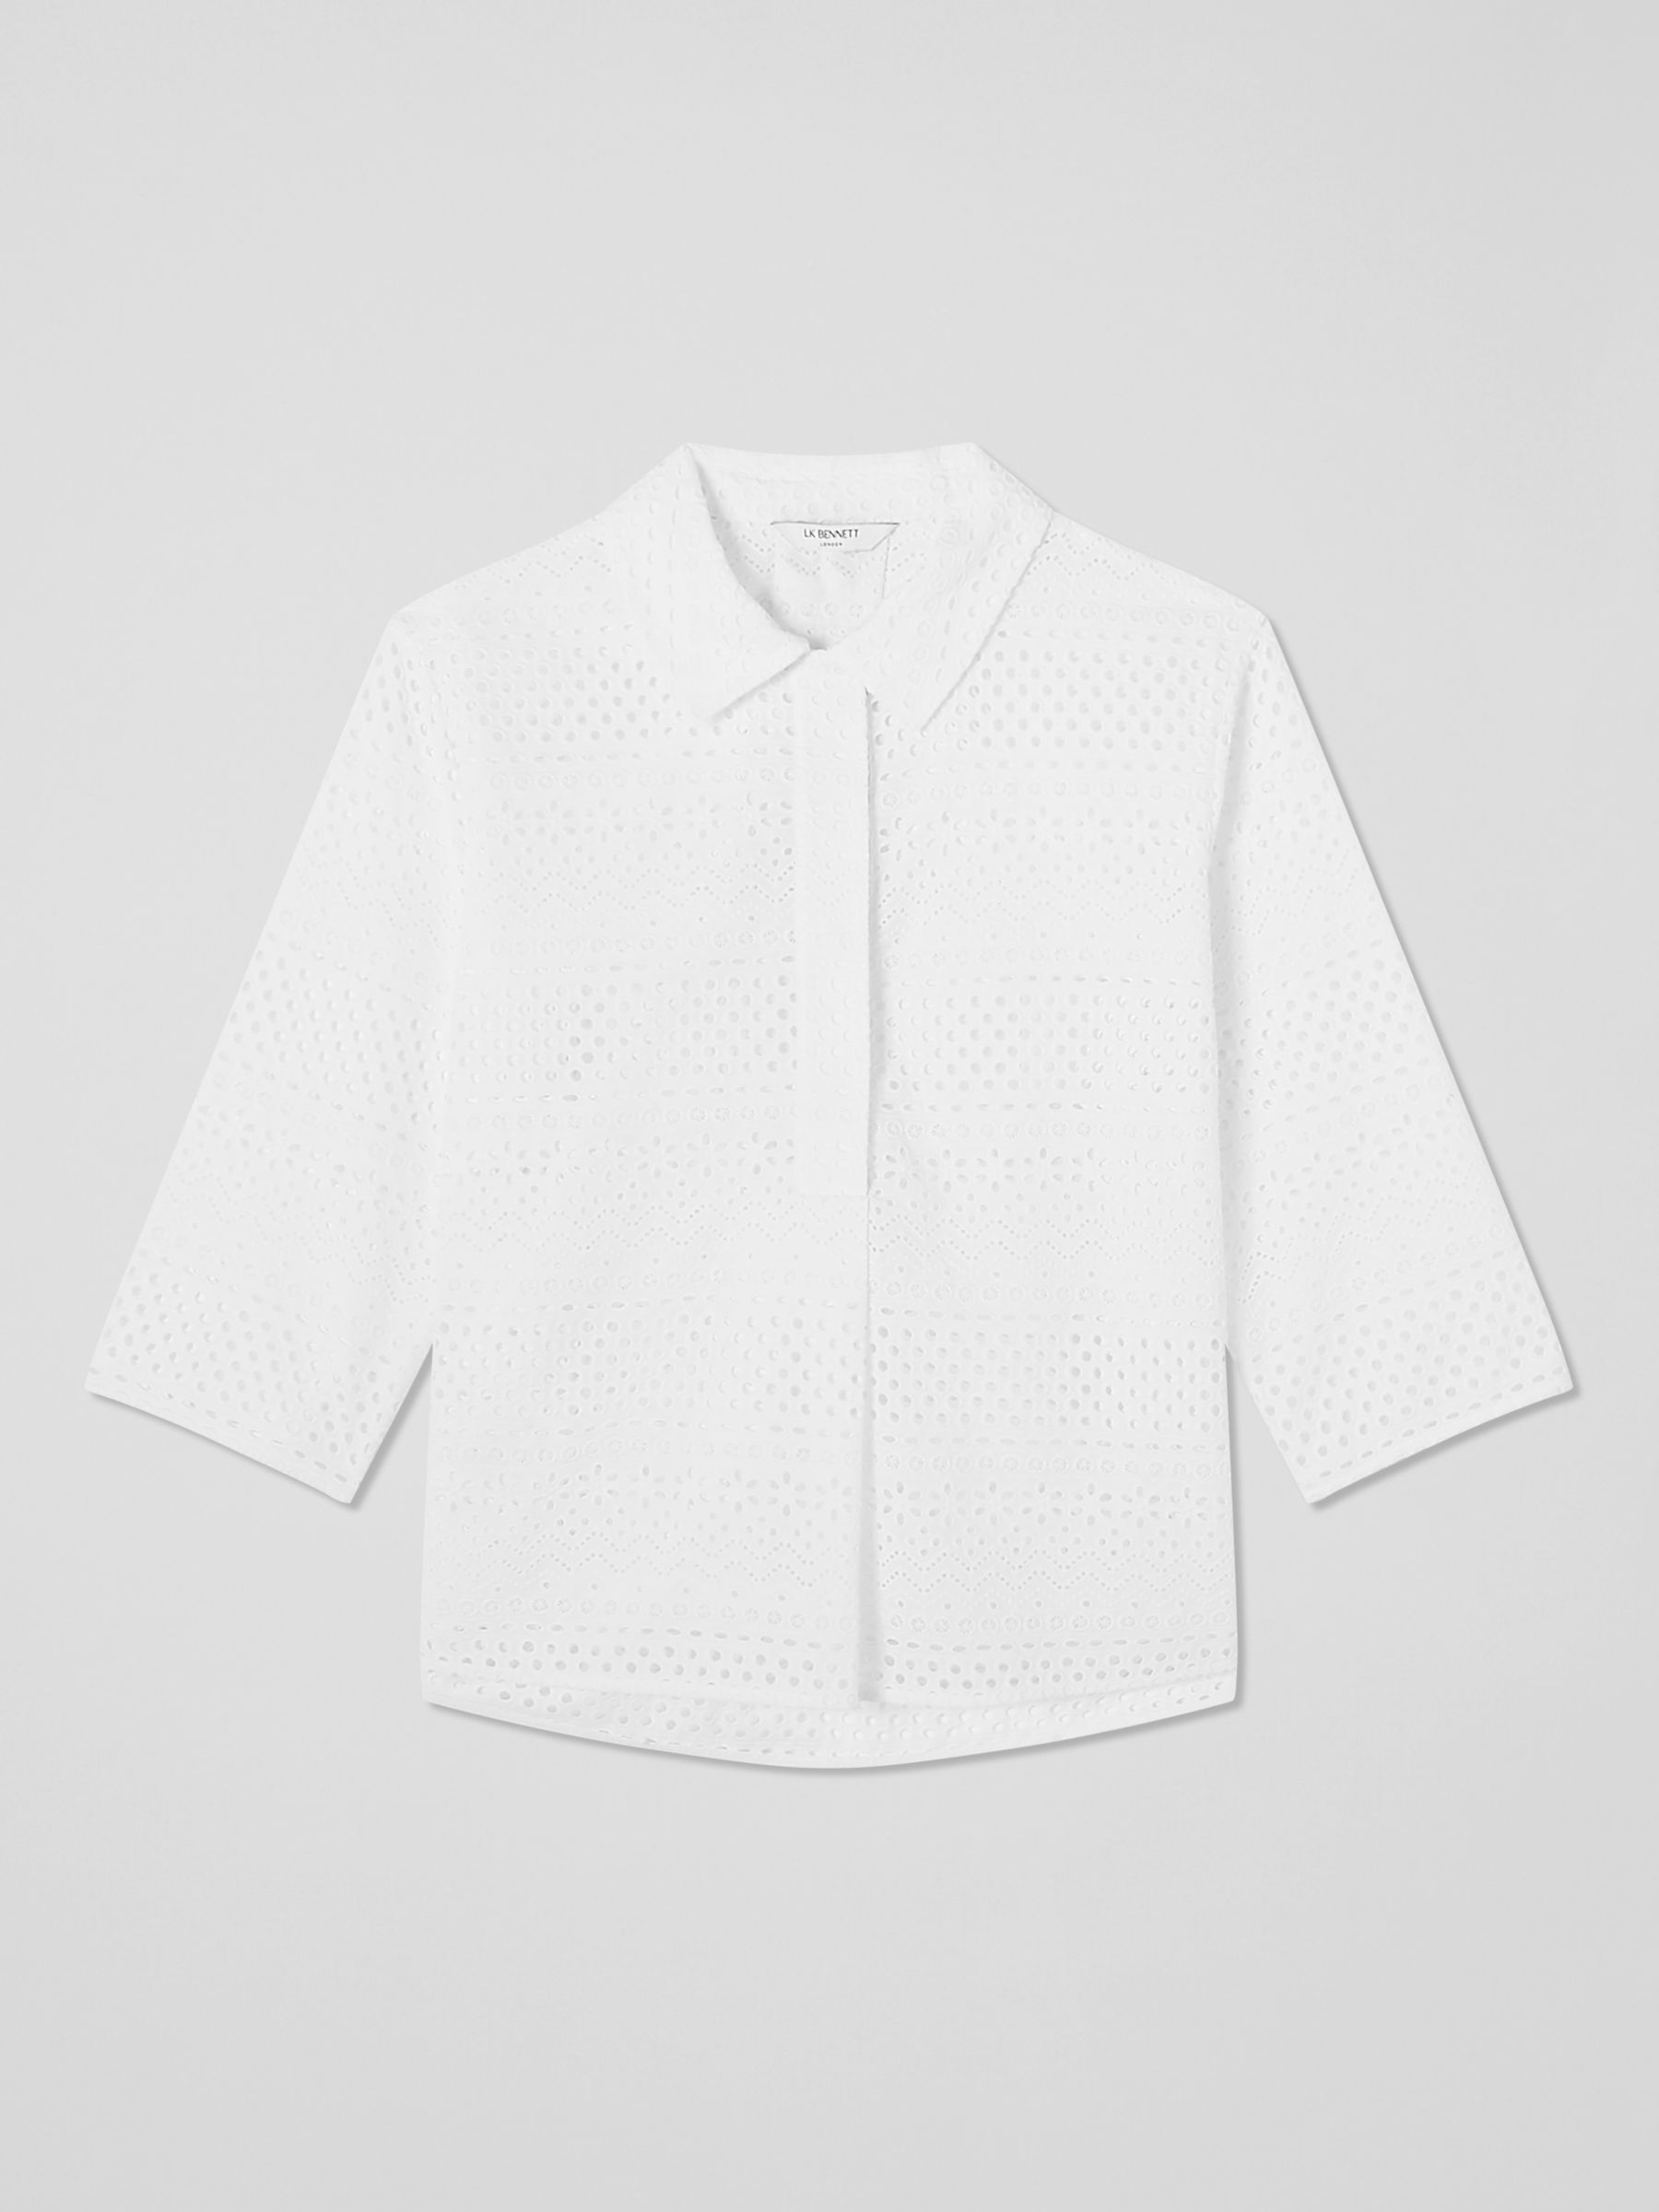 L.K.Bennett Edie Broderie Anglaise Relaxed Fit Shirt, White, 6